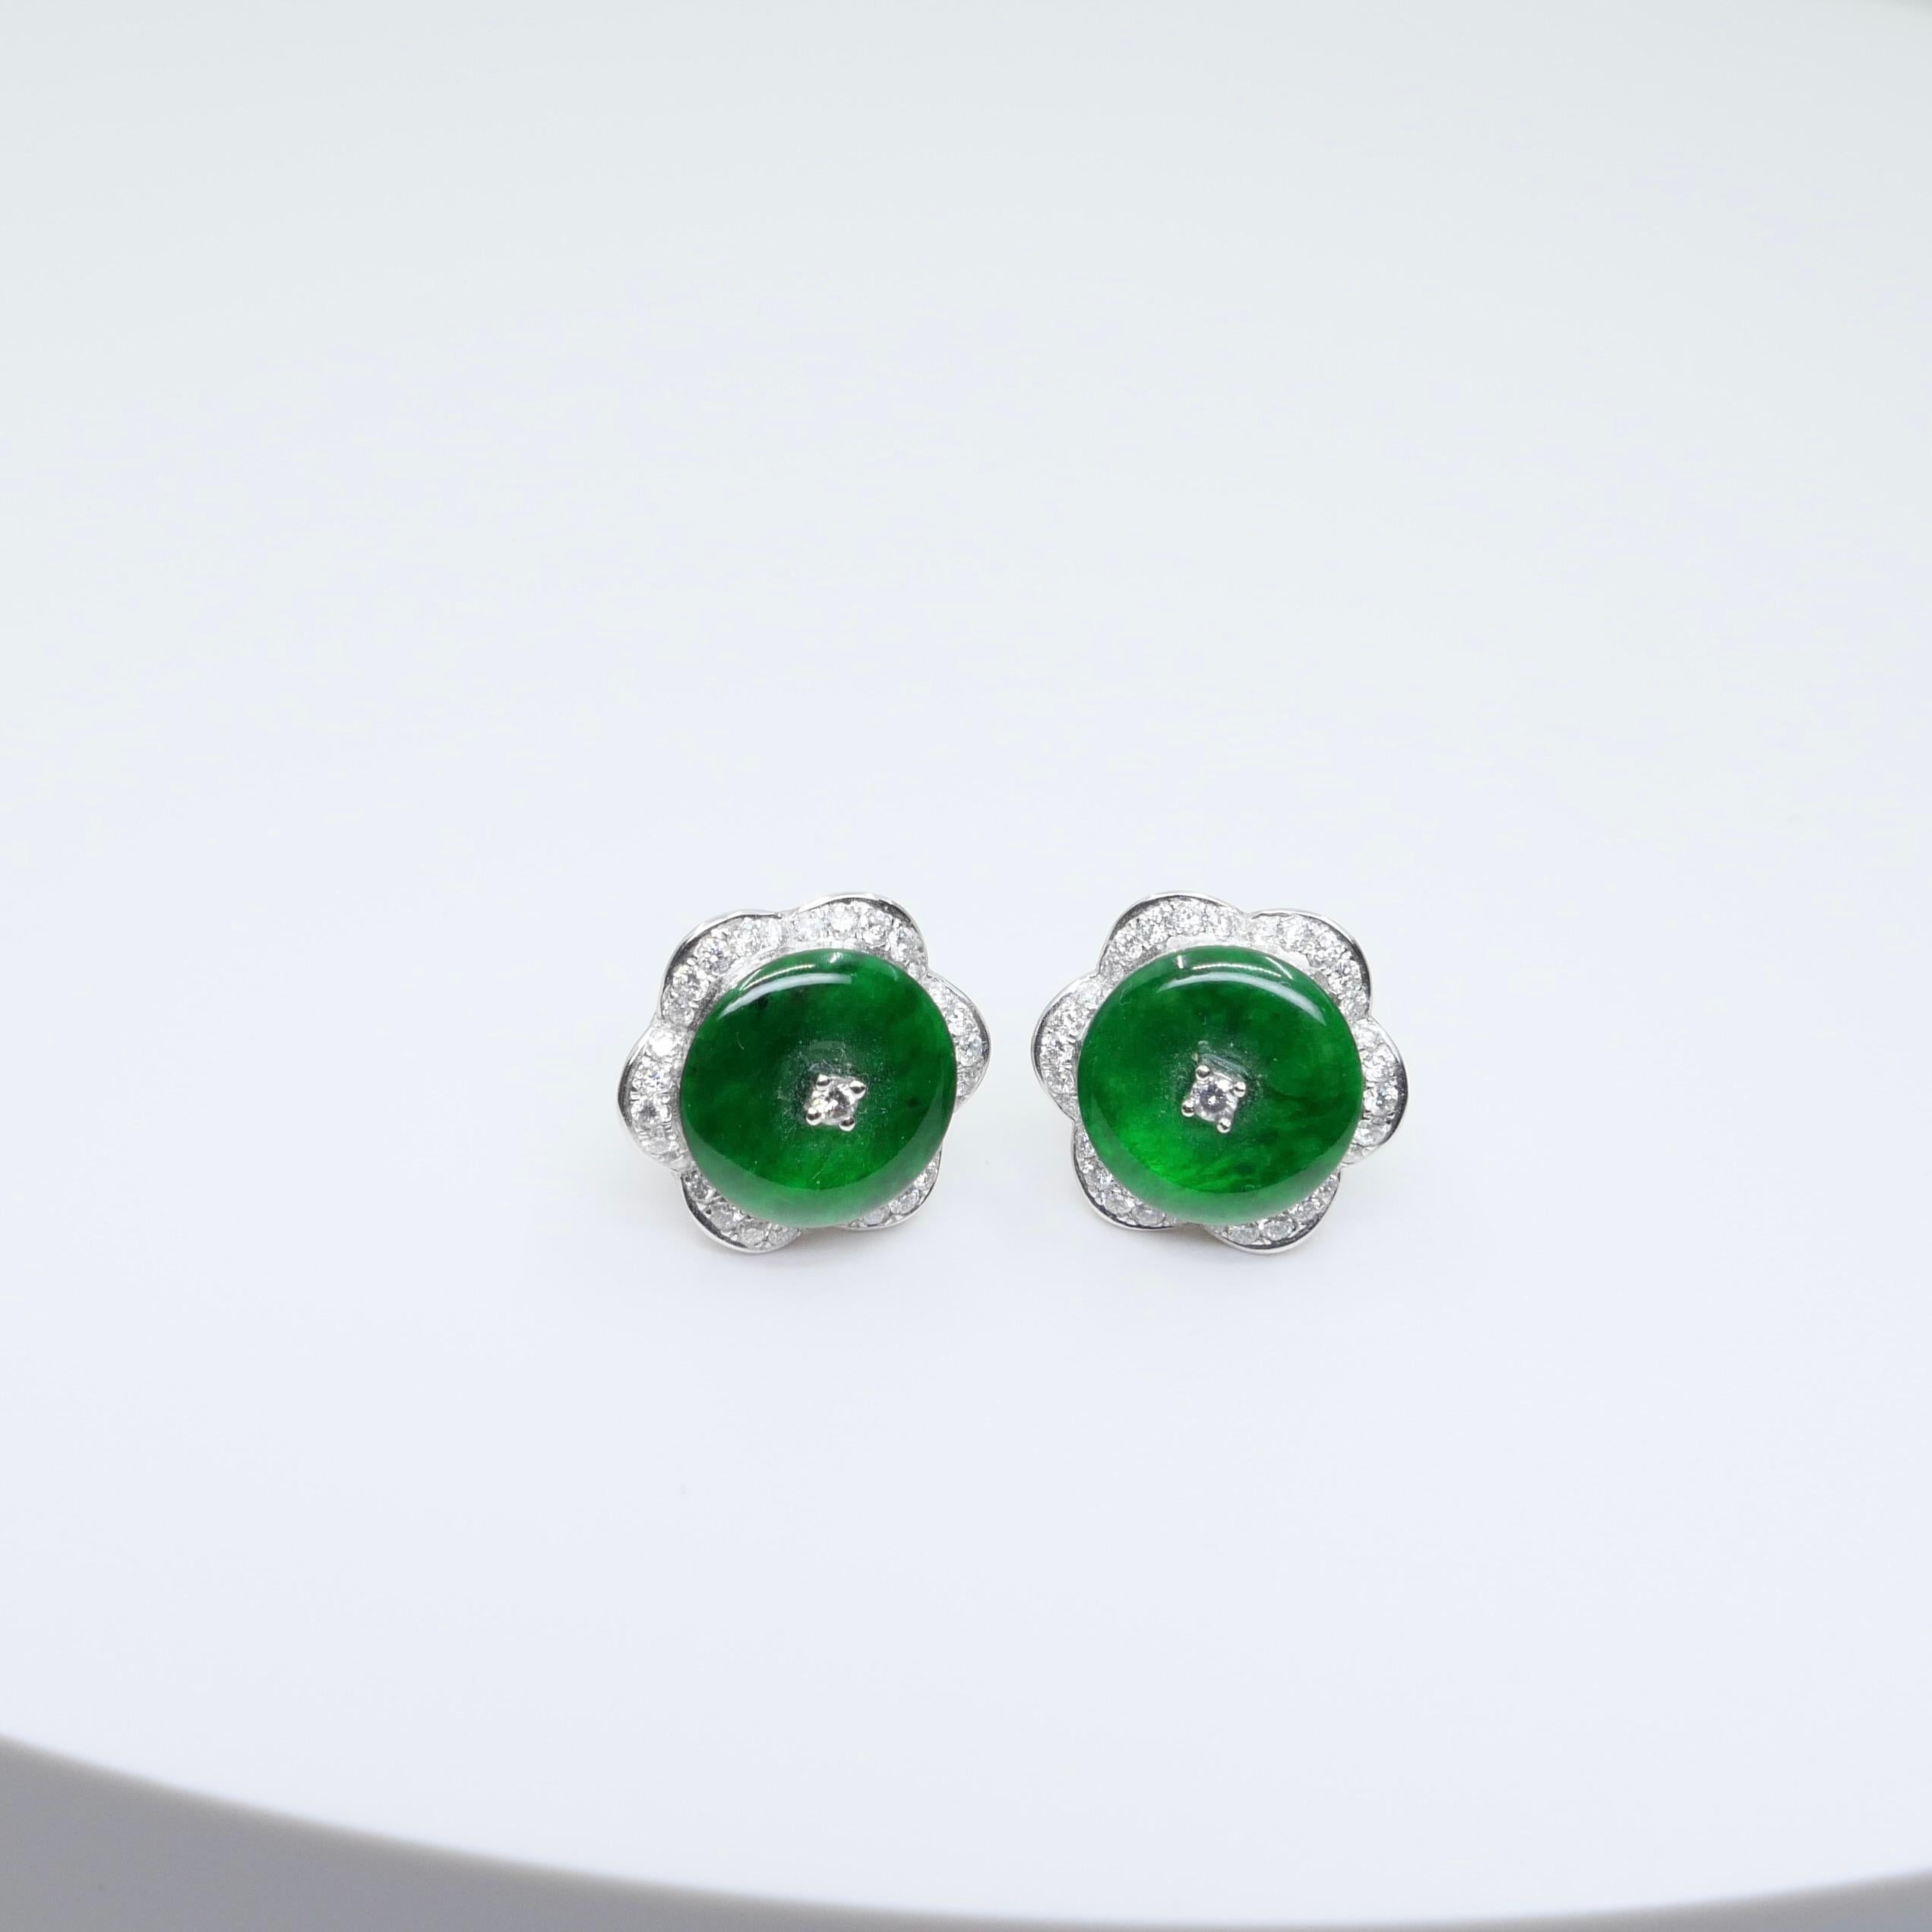 Certified Natural Type A Jadeite Jade And Diamond Earrings. Apple Green Color 3